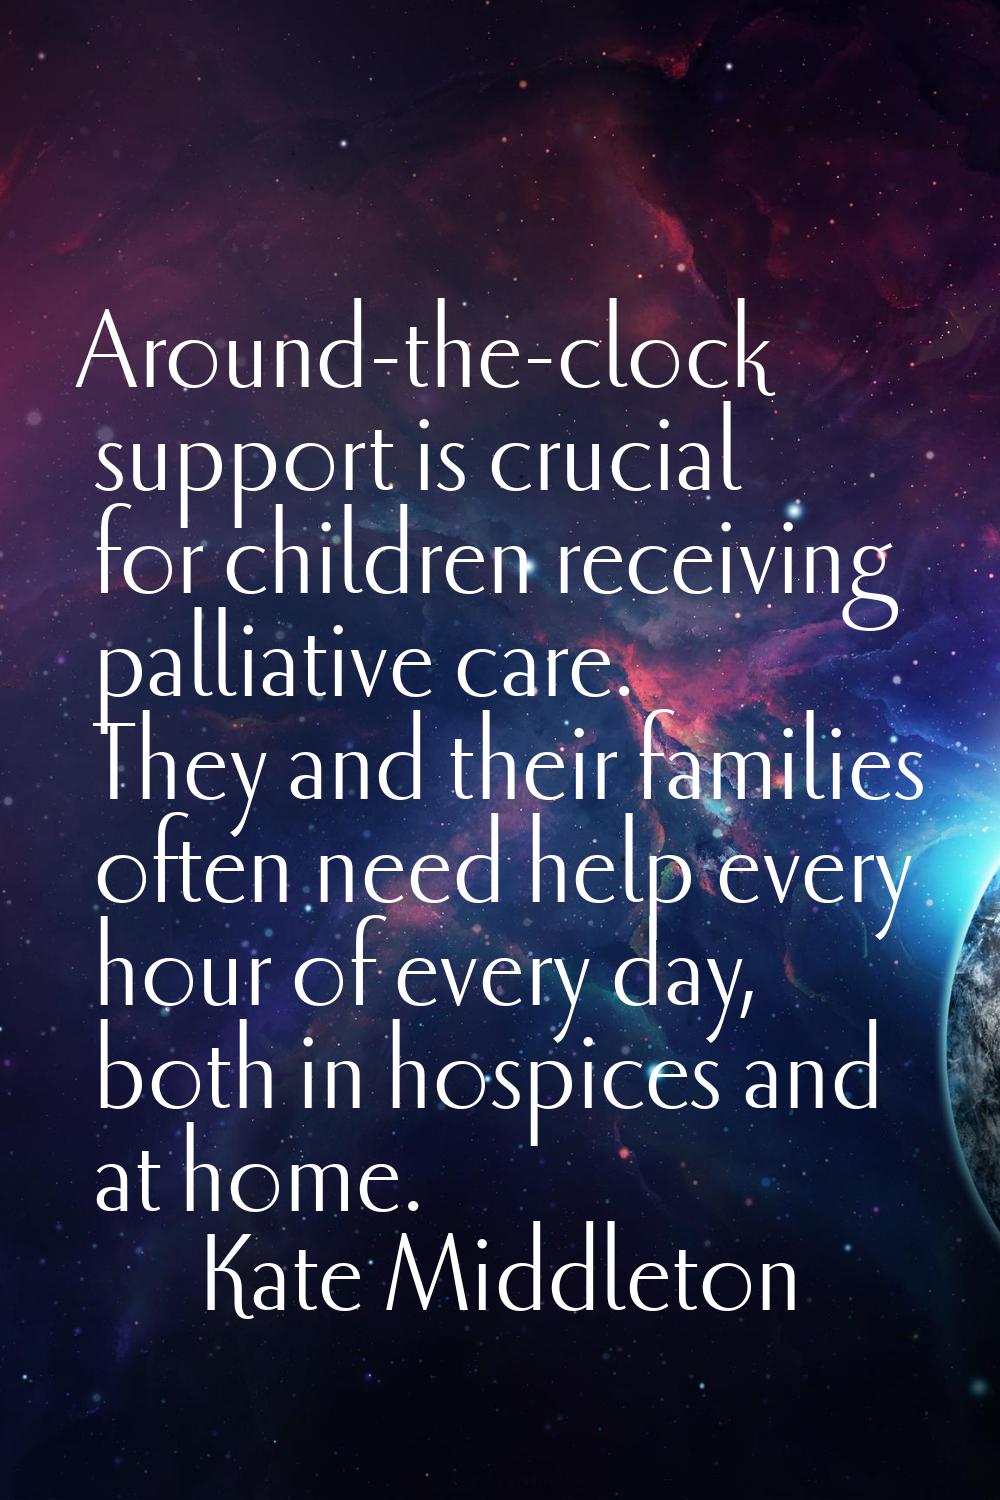 Around-the-clock support is crucial for children receiving palliative care. They and their families